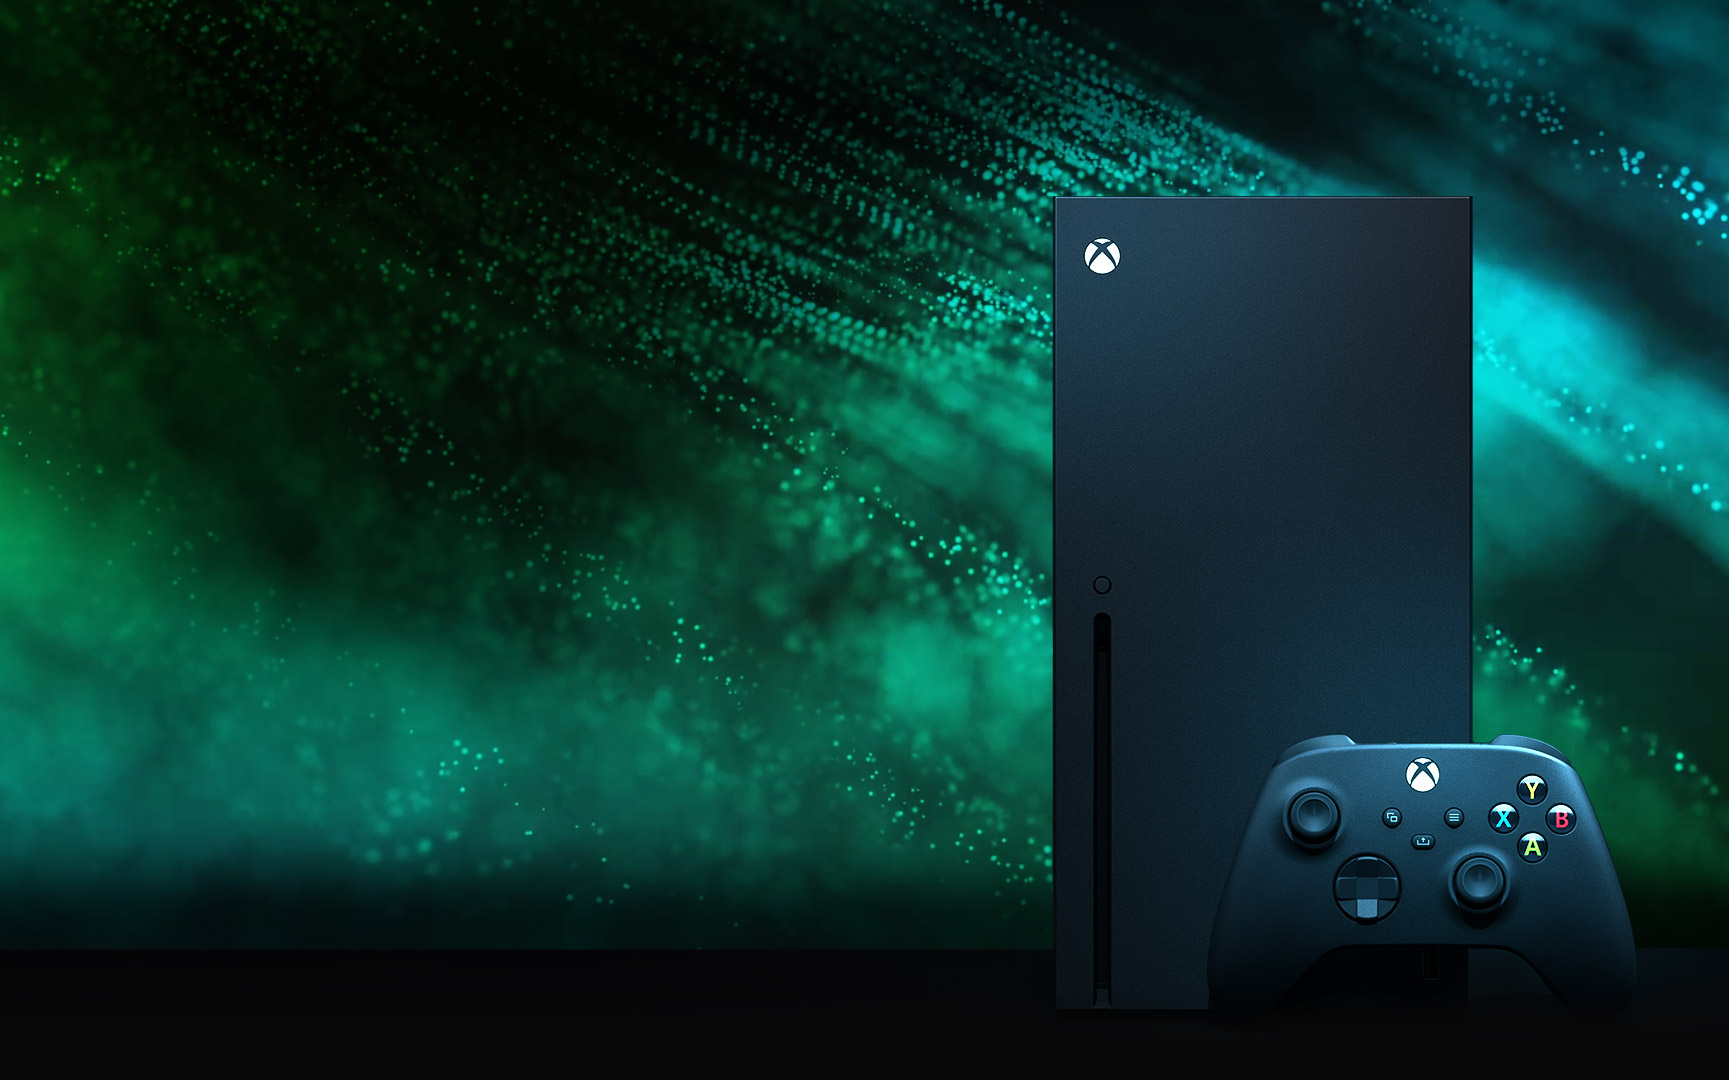 Xbox Series X console with Xbox controller. Animated background of characters from Starfield, Redfall and Diablo IV.